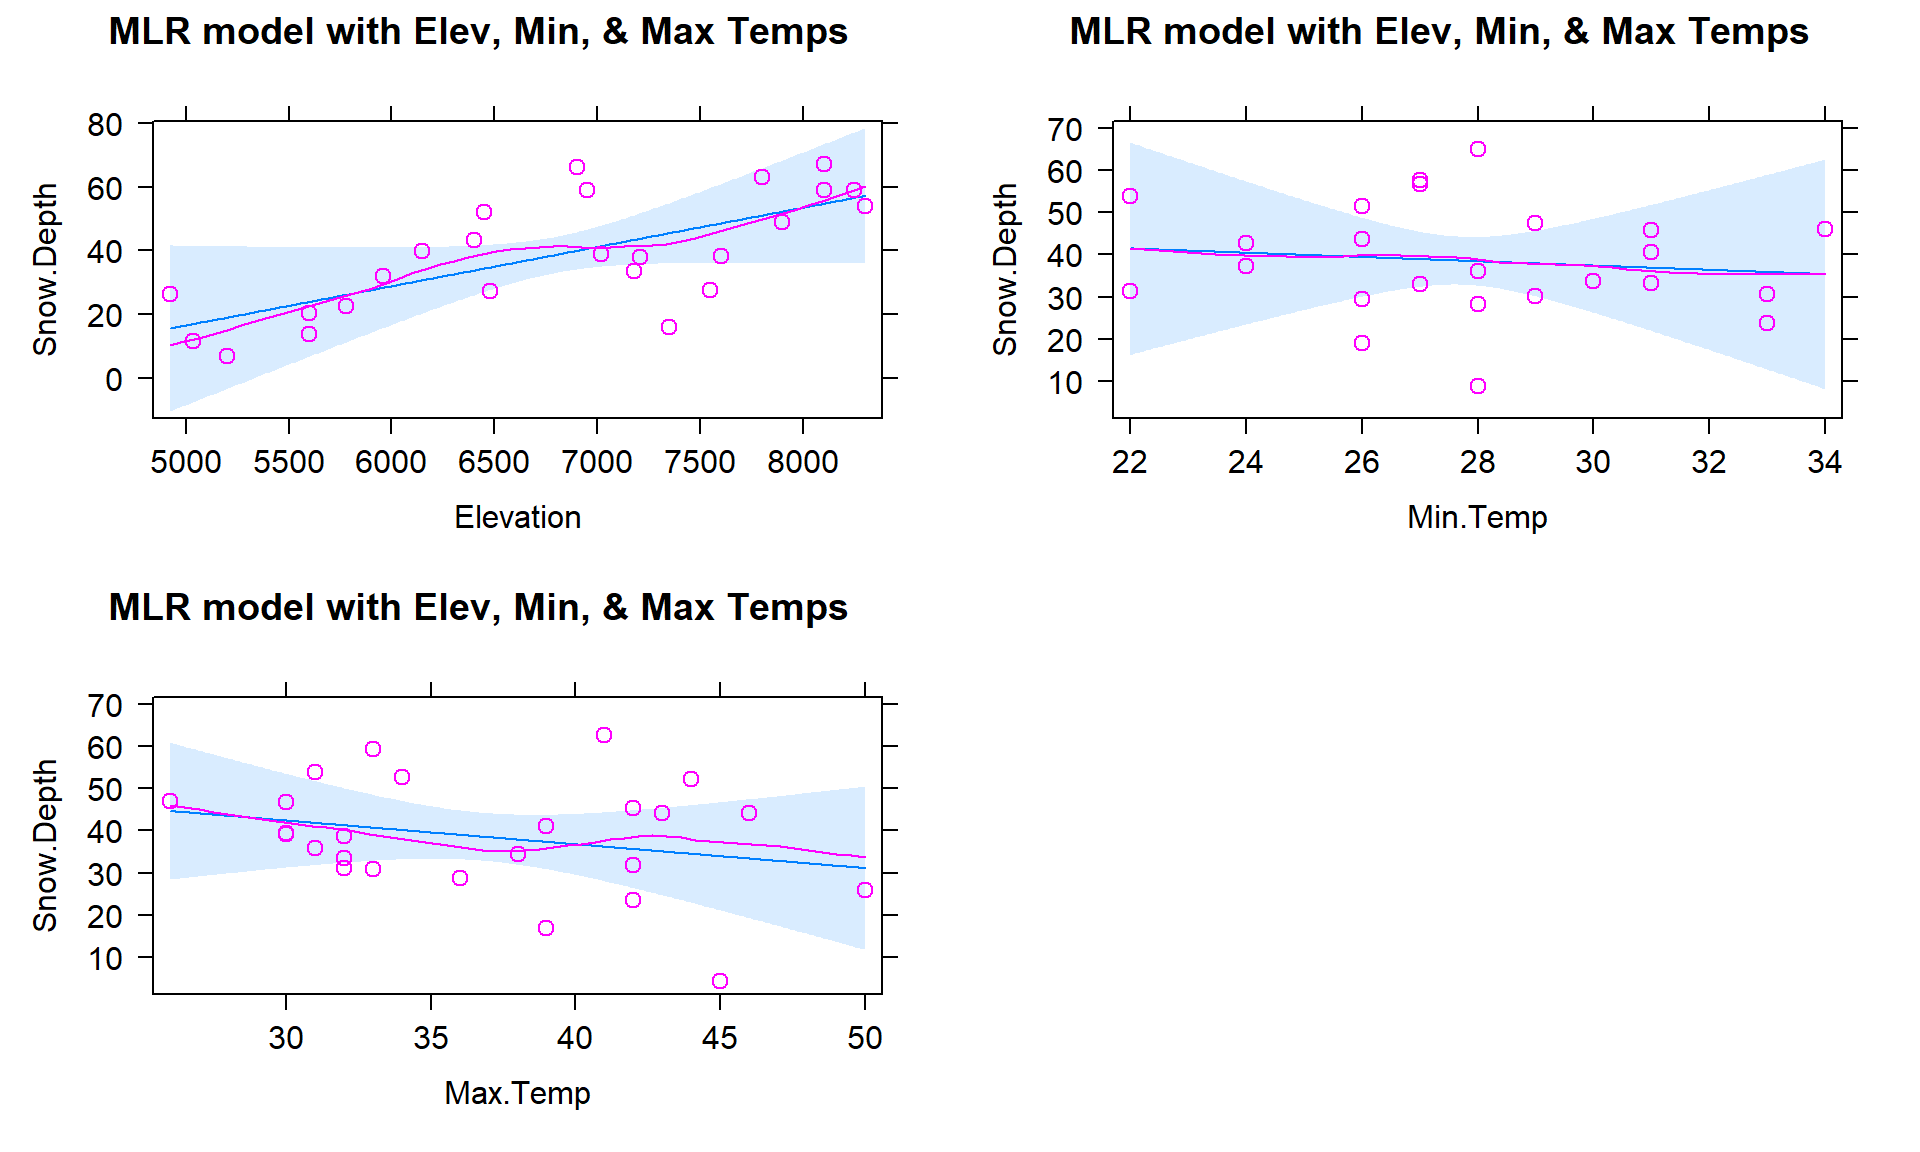 Term-plots for the MLR for Snow Depth based on Elevation, Min Temp and Max Temp. Compare this plot that comes from one MLR model to Figures 8.2, 8.3, and 8.4 for comparable SLR models. Note the points in these panels are the partial residuals that are generated after controlling for the other two of the three variables as explained below.